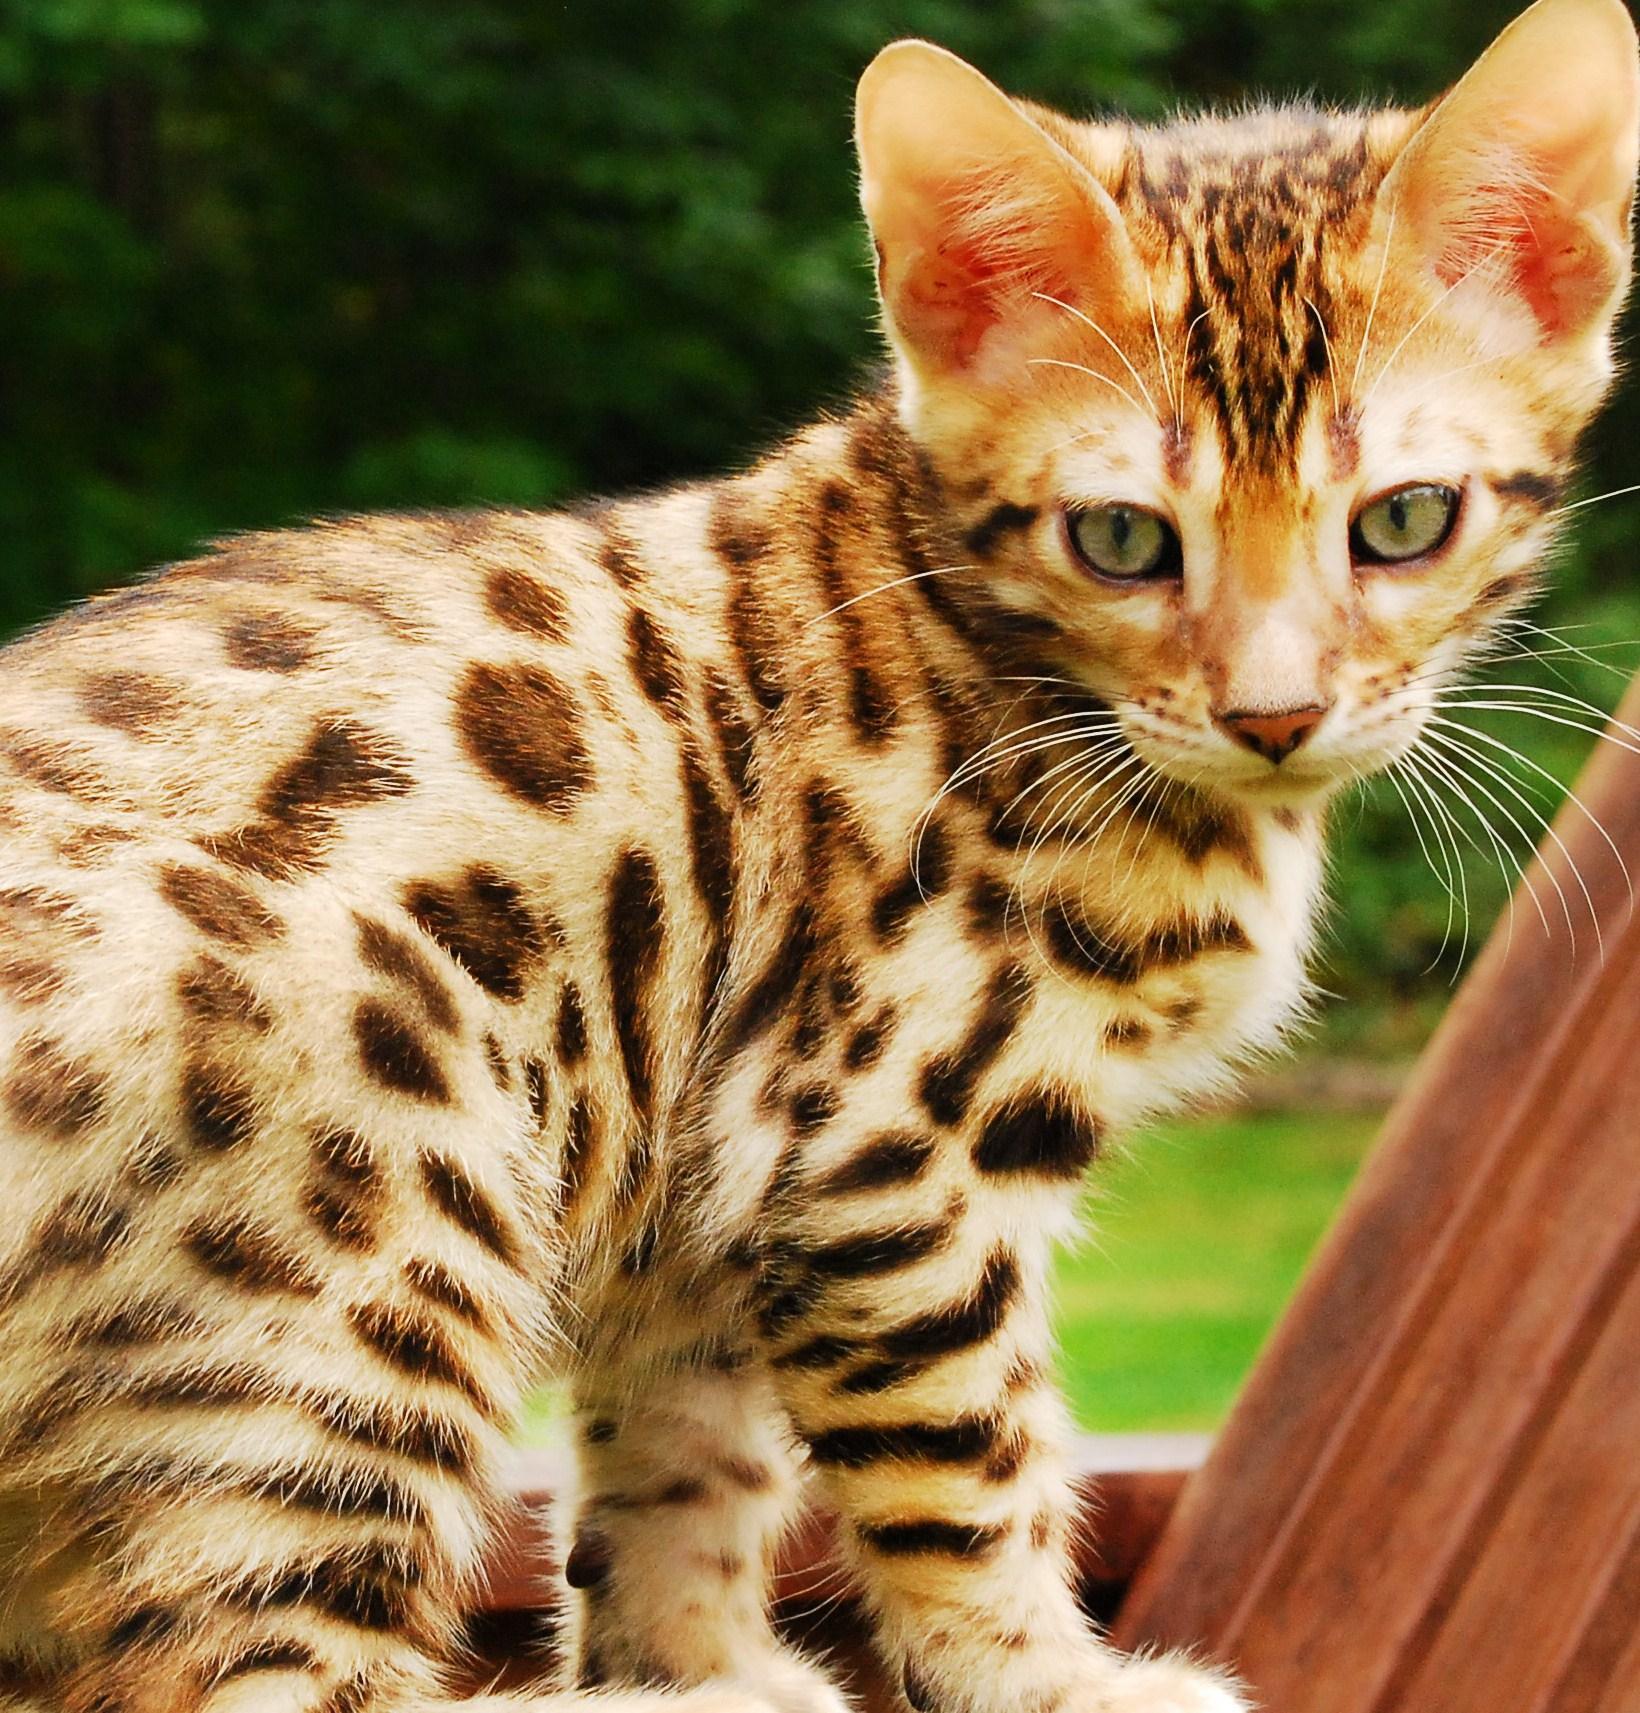 a bengal kitten sitting and looking down